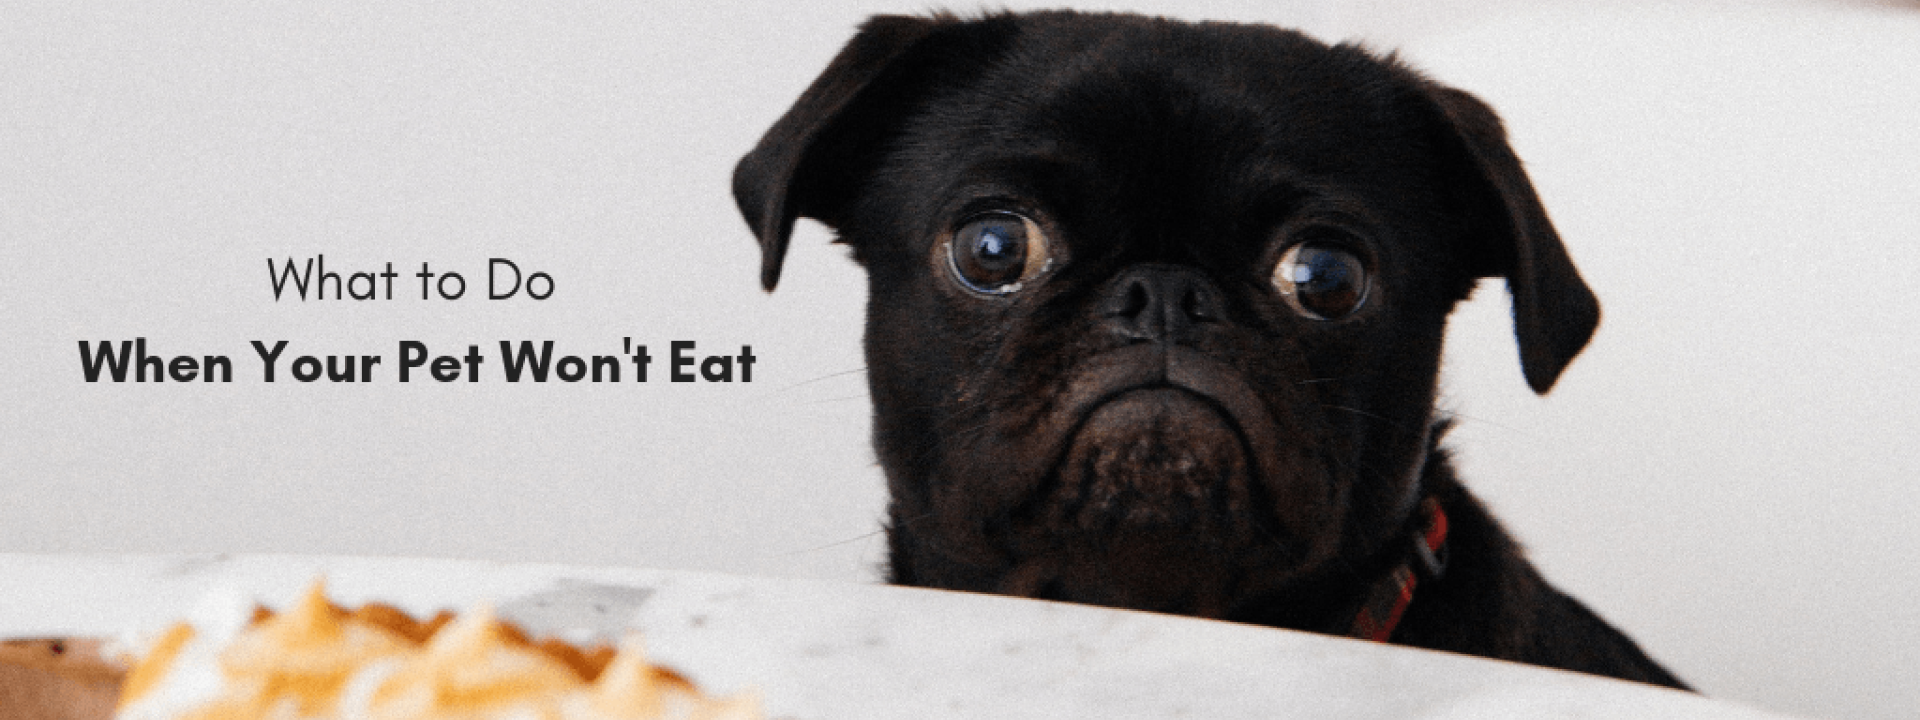 What to do when your pet won't eat